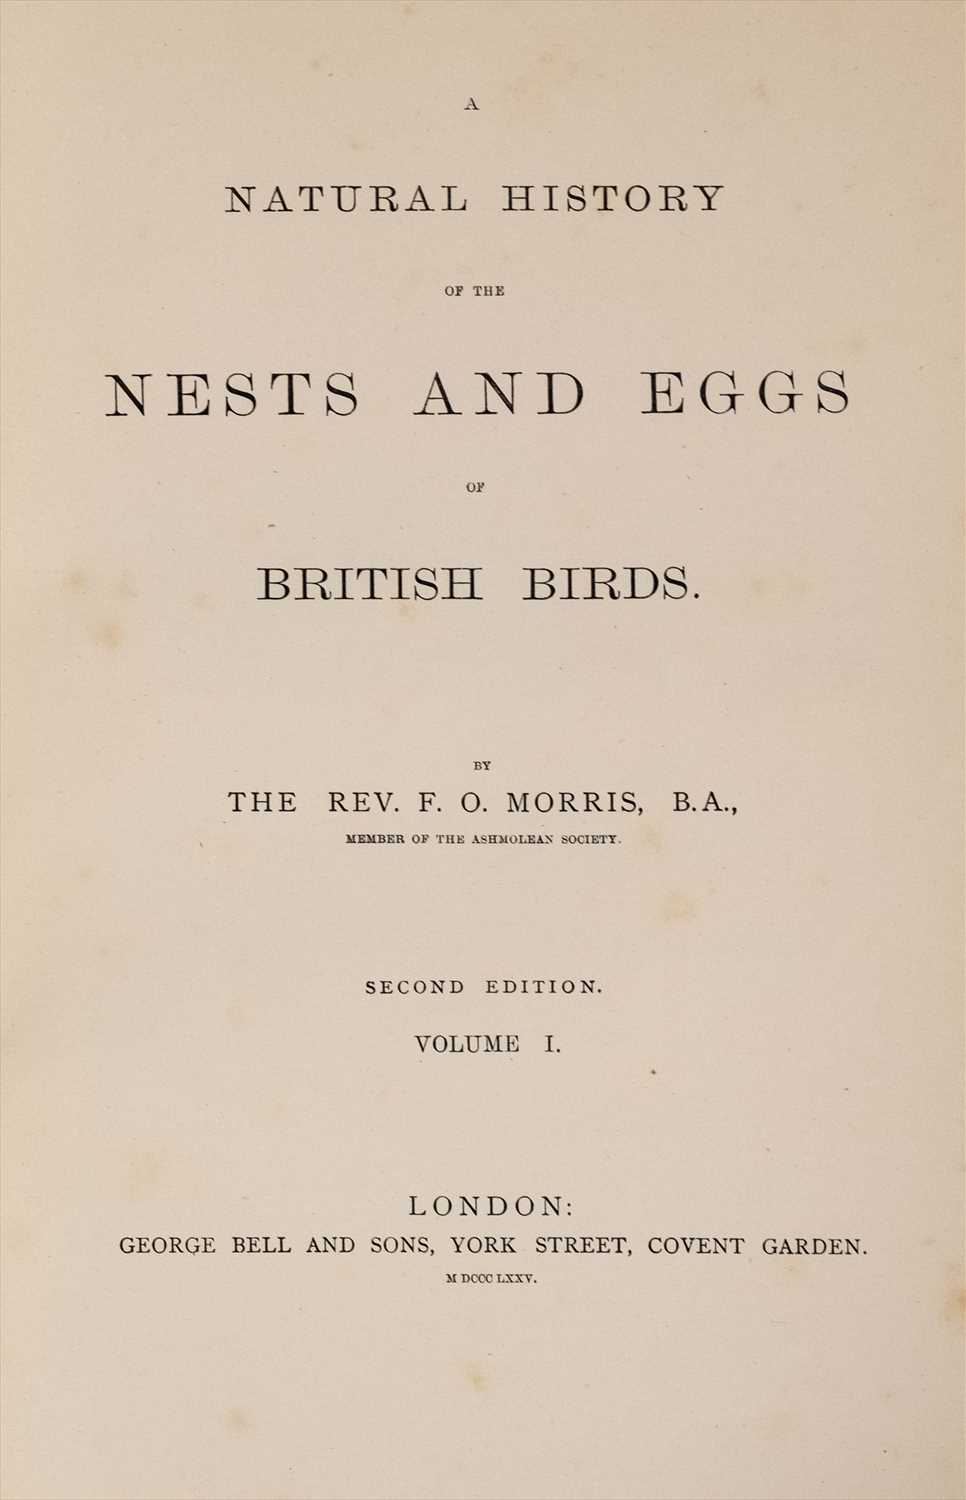 Lot 75 - Morris (Francis Orpen). A Natural History of the Nests and Eggs of British Birds, 3 volumes